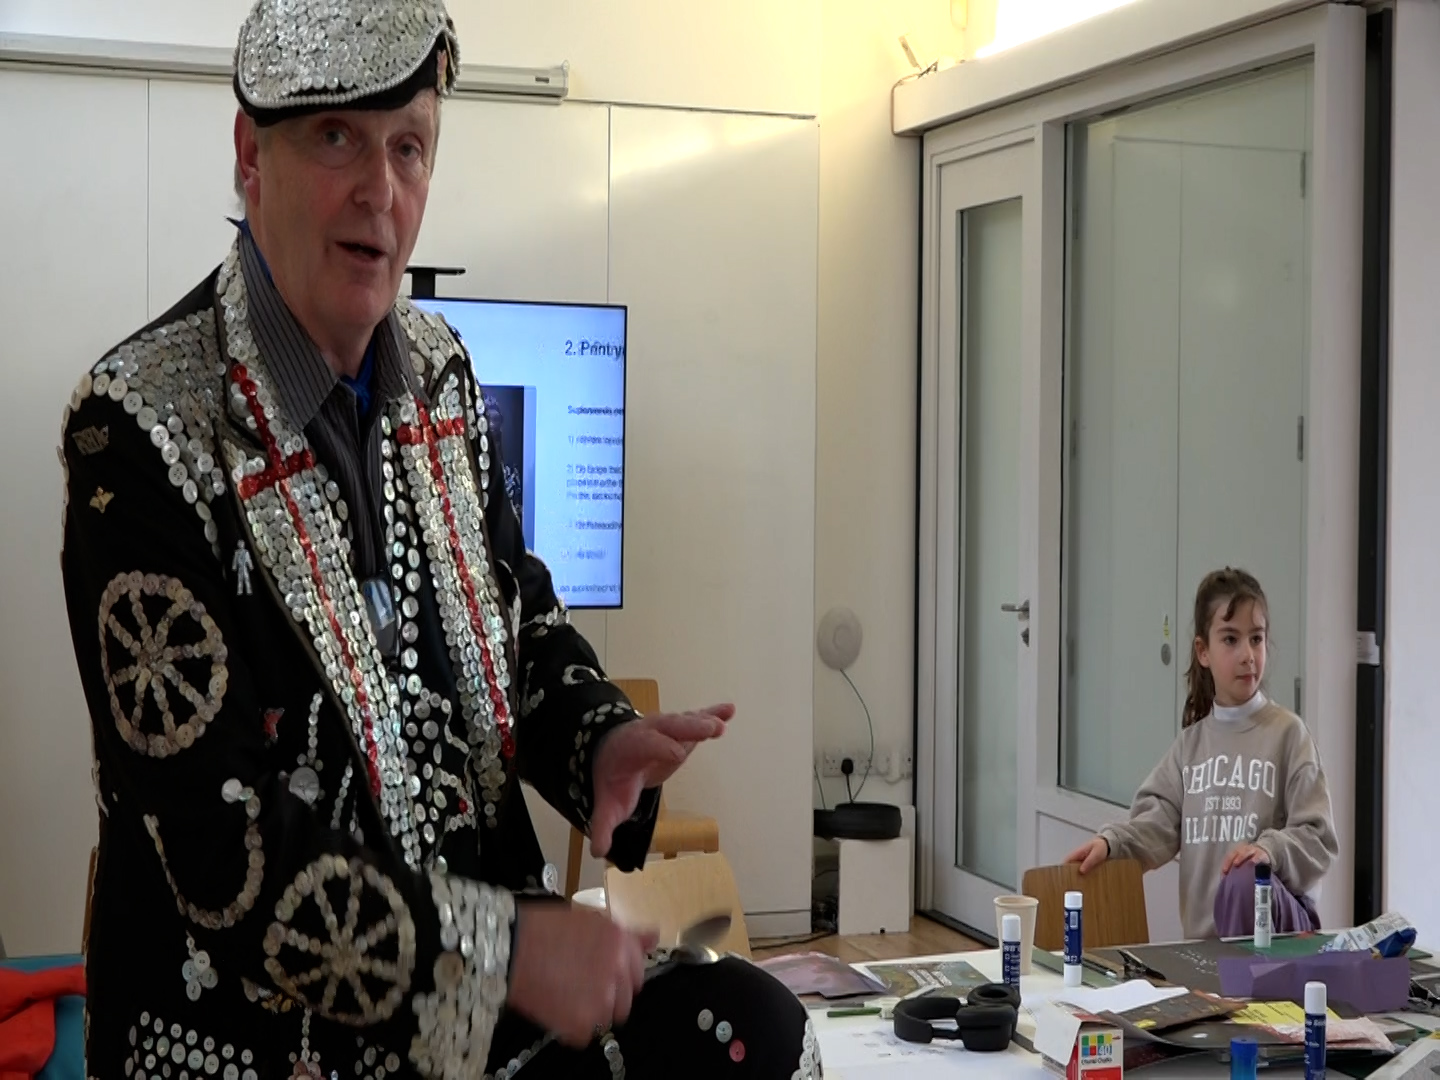 The Pearly King Clive Bennett performs in the workshop